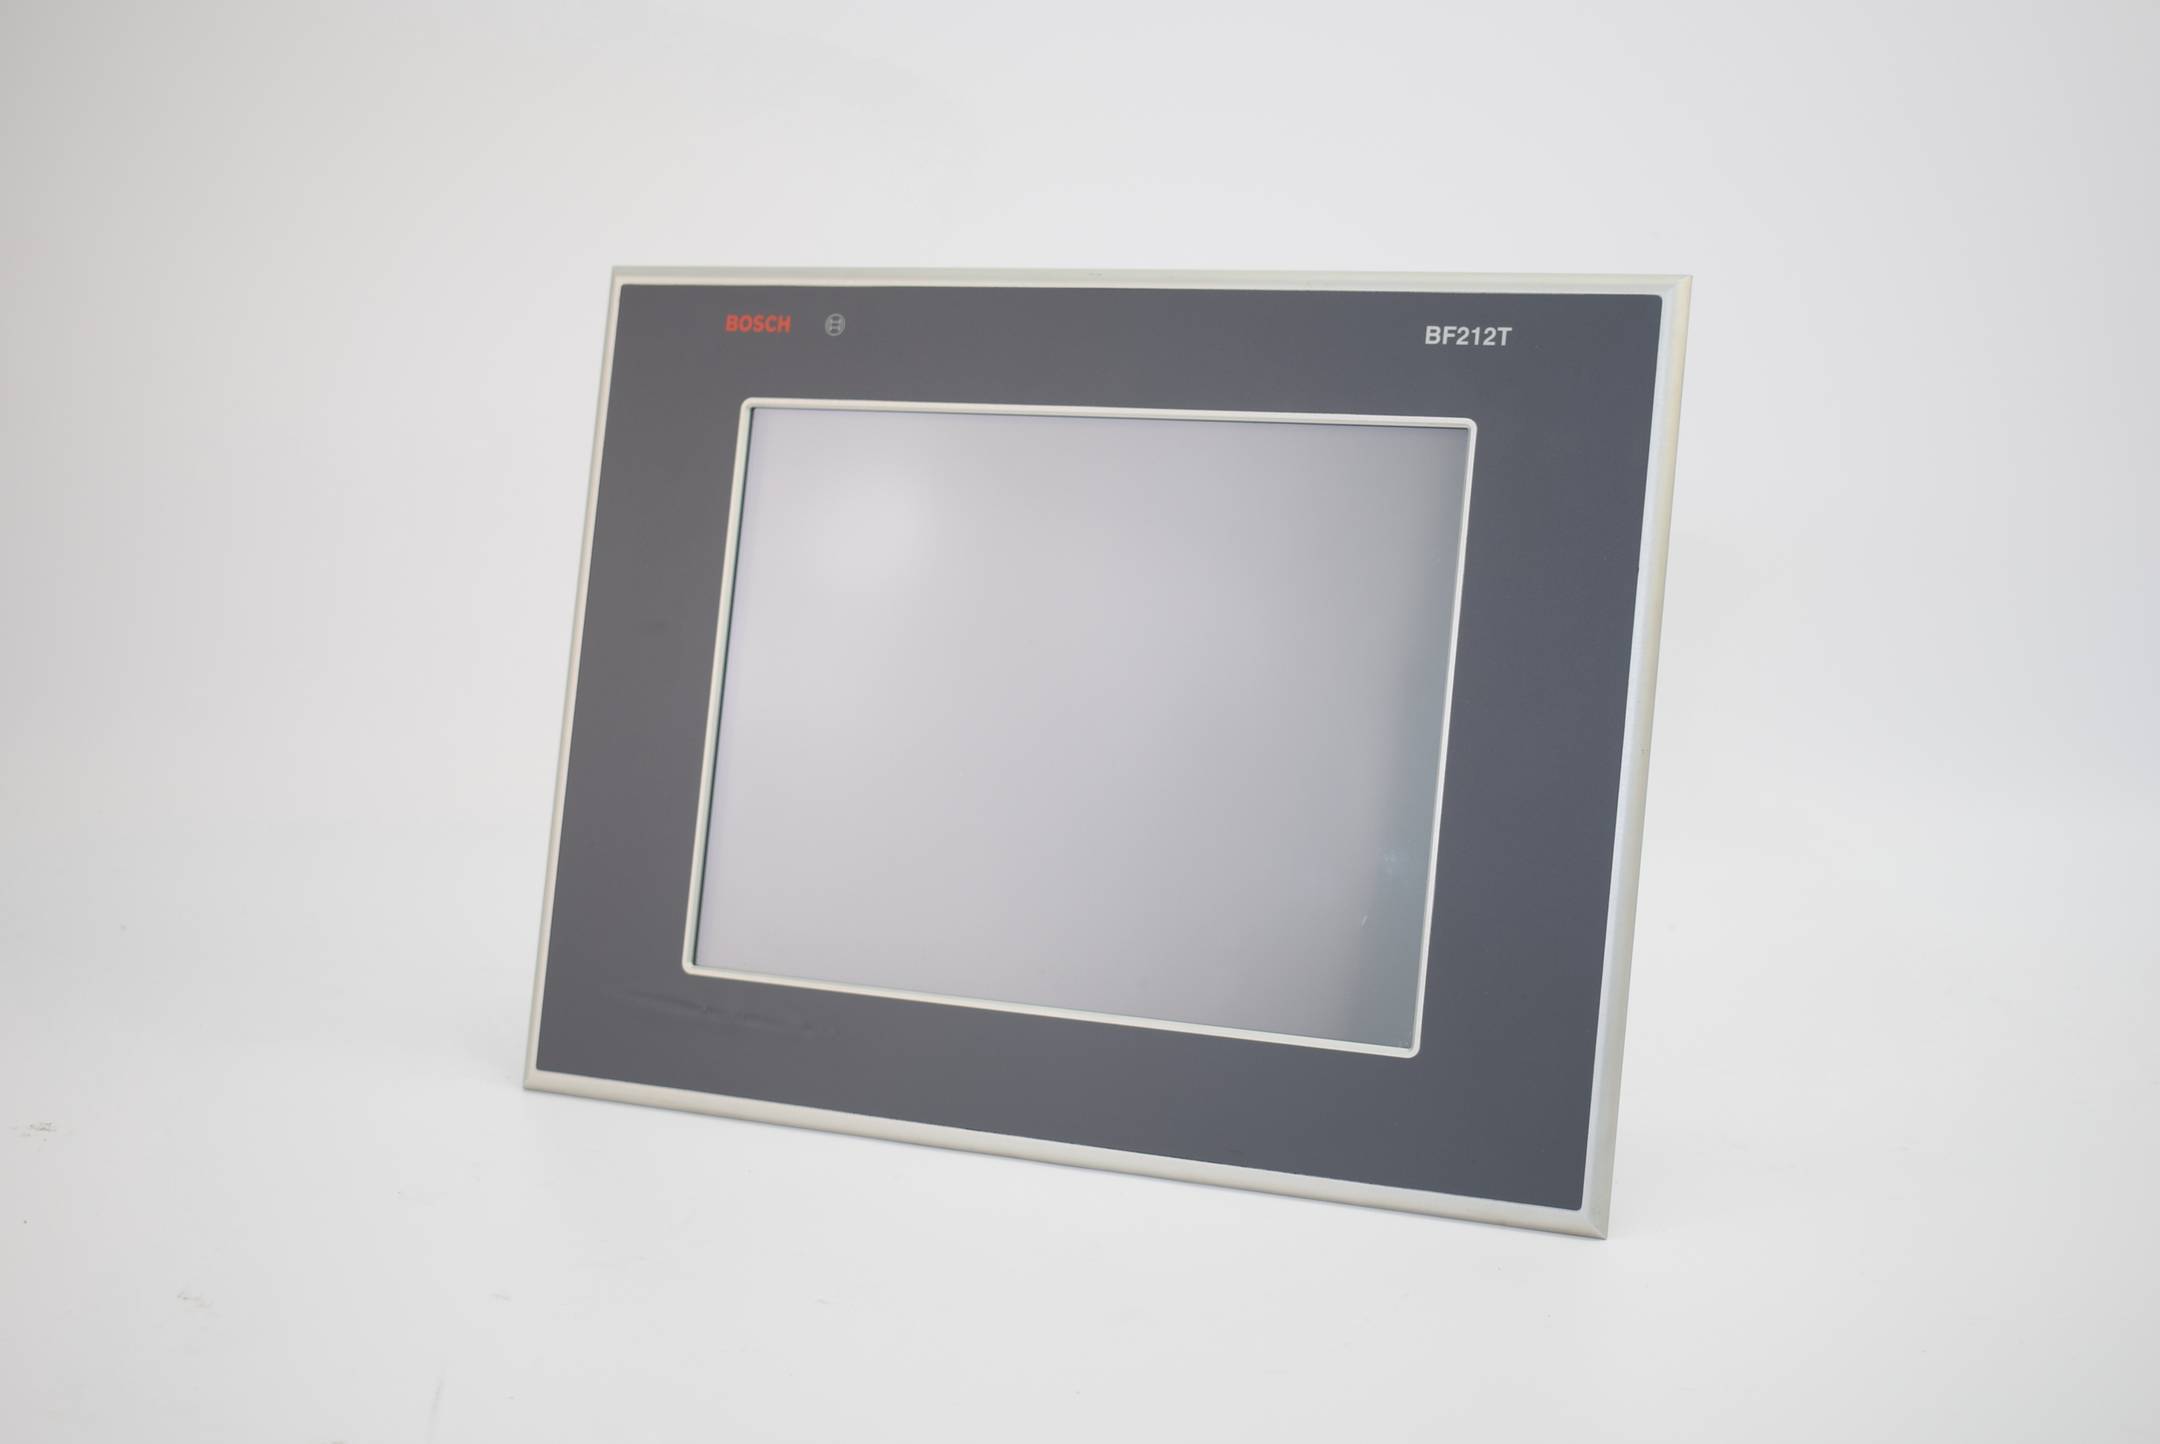 Bosch Indramat Rexroth HMI Touch Panel BF212T ( BF 212T ) 1070081212-216